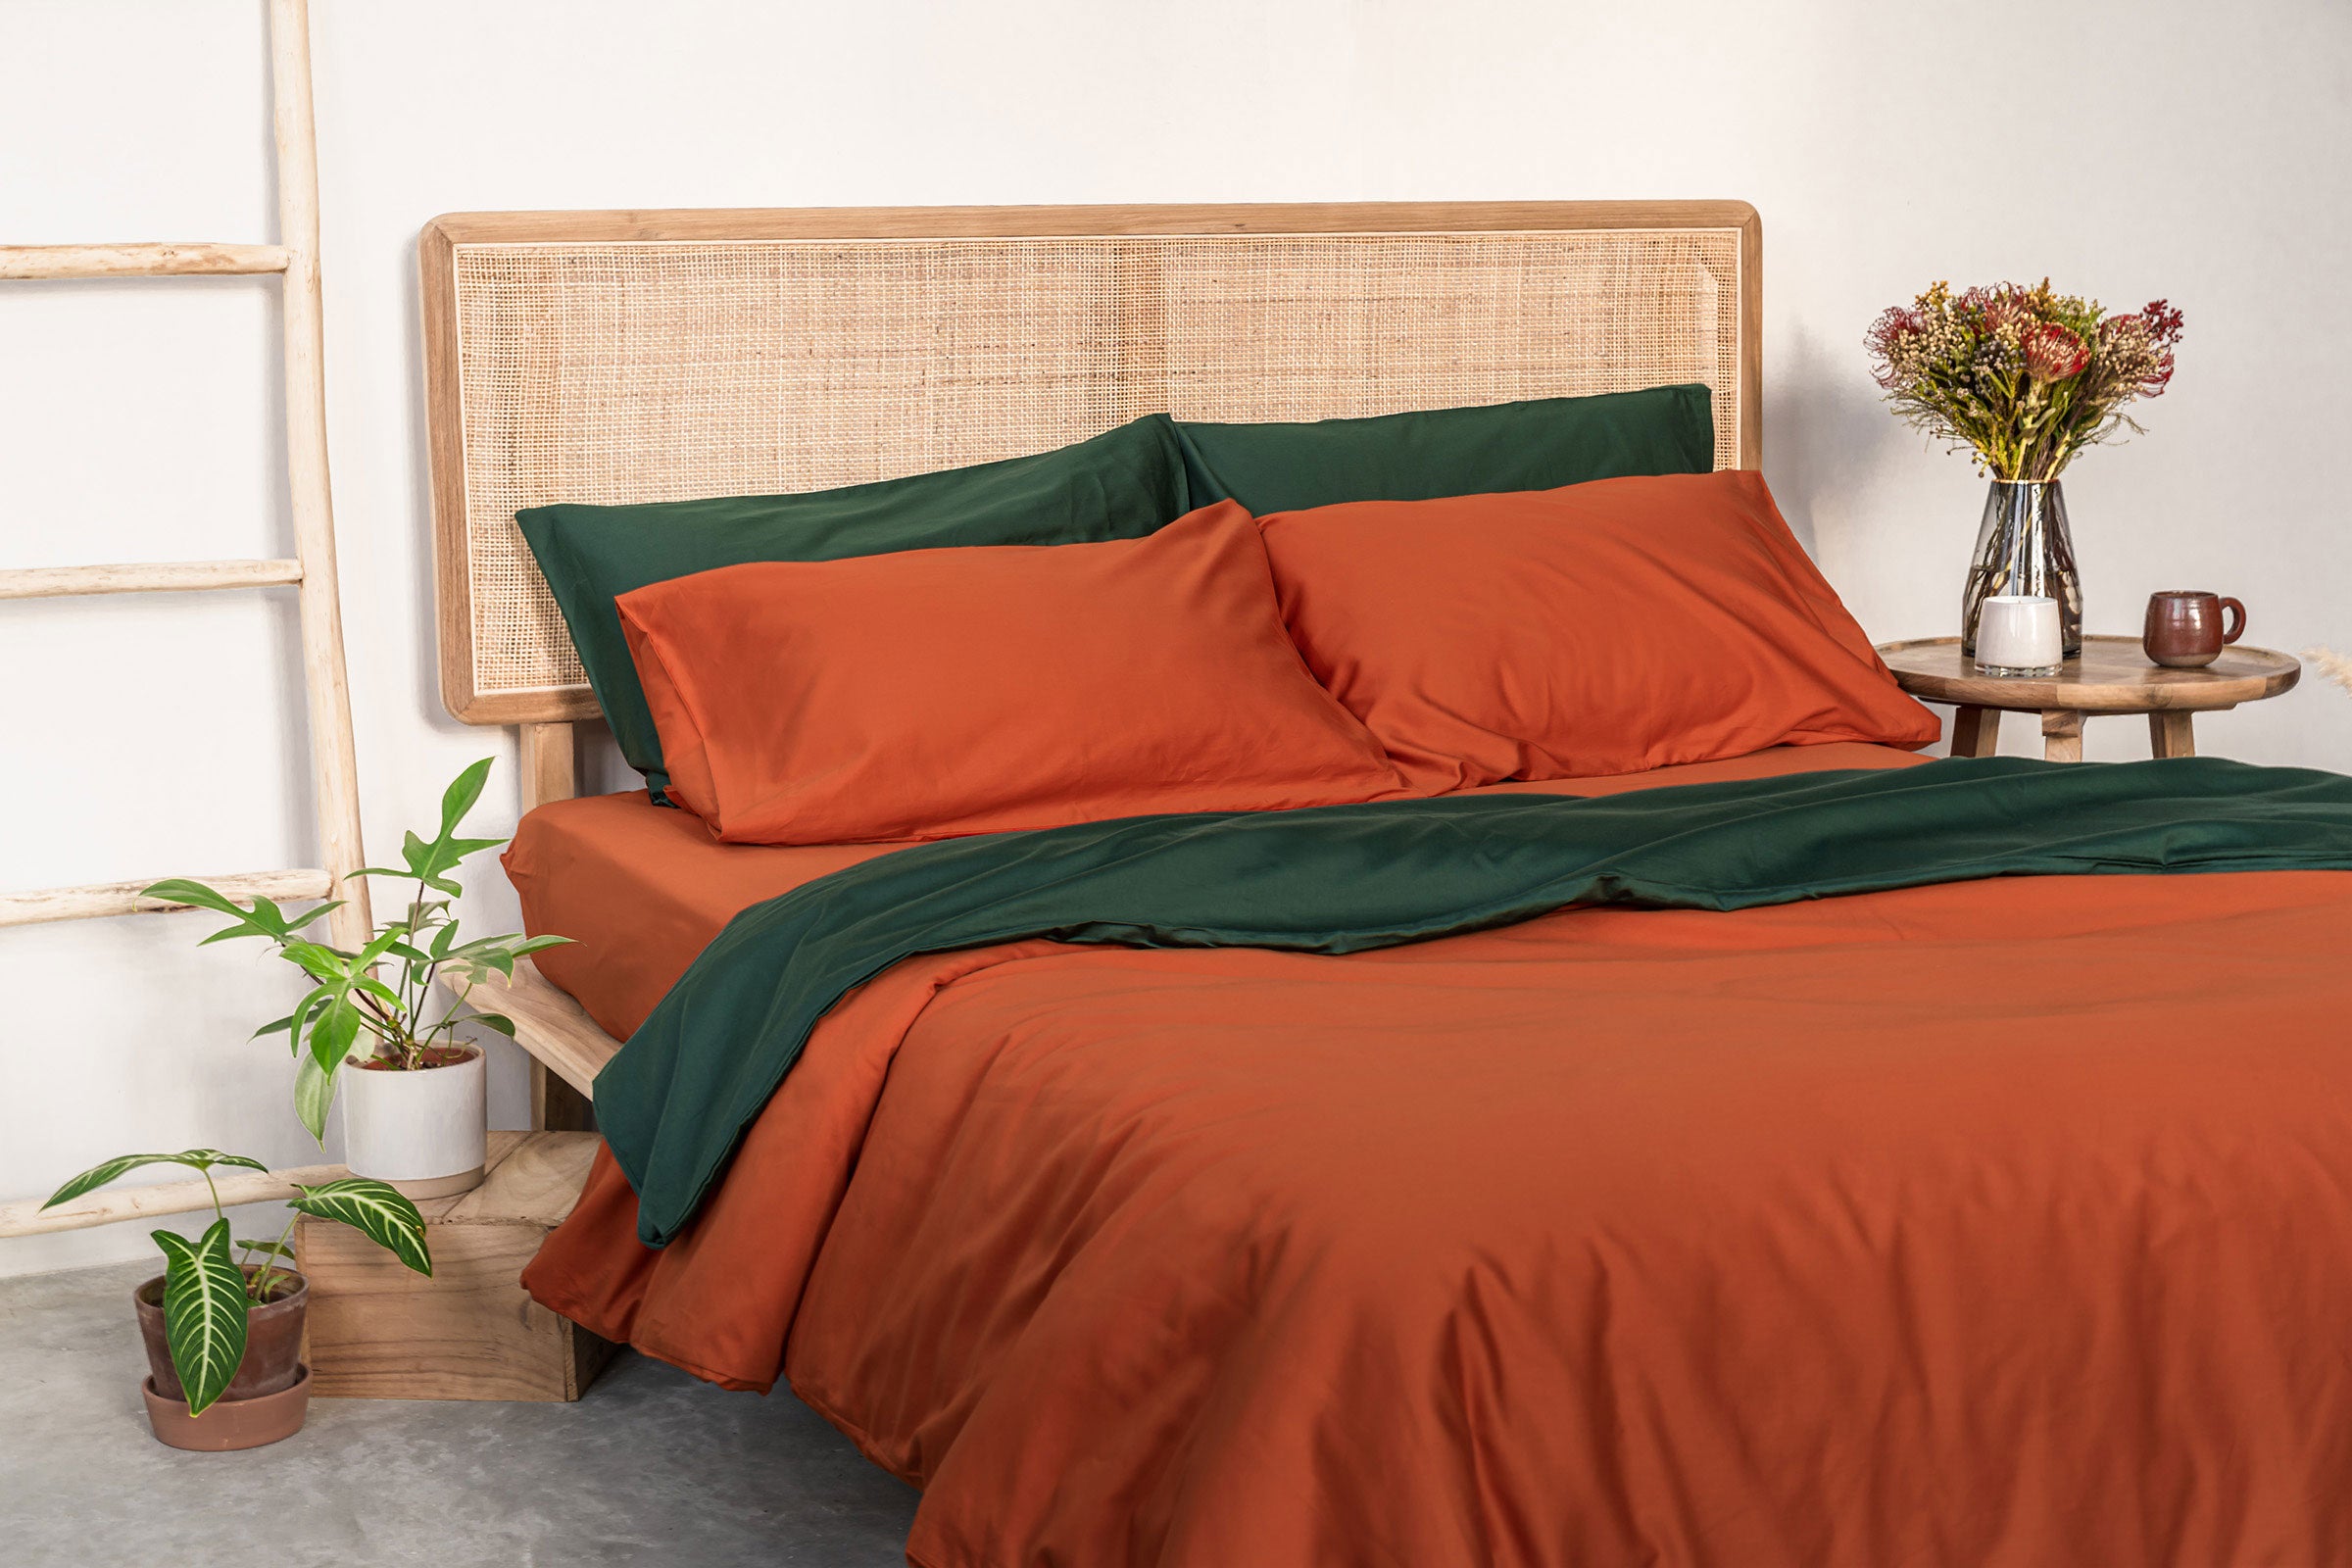 classic-autumn-duvet-cover-fitted-sheet-pillowcase-pair-and-forest-pillowcase-pair-flatsheet-by-sojao.jpg